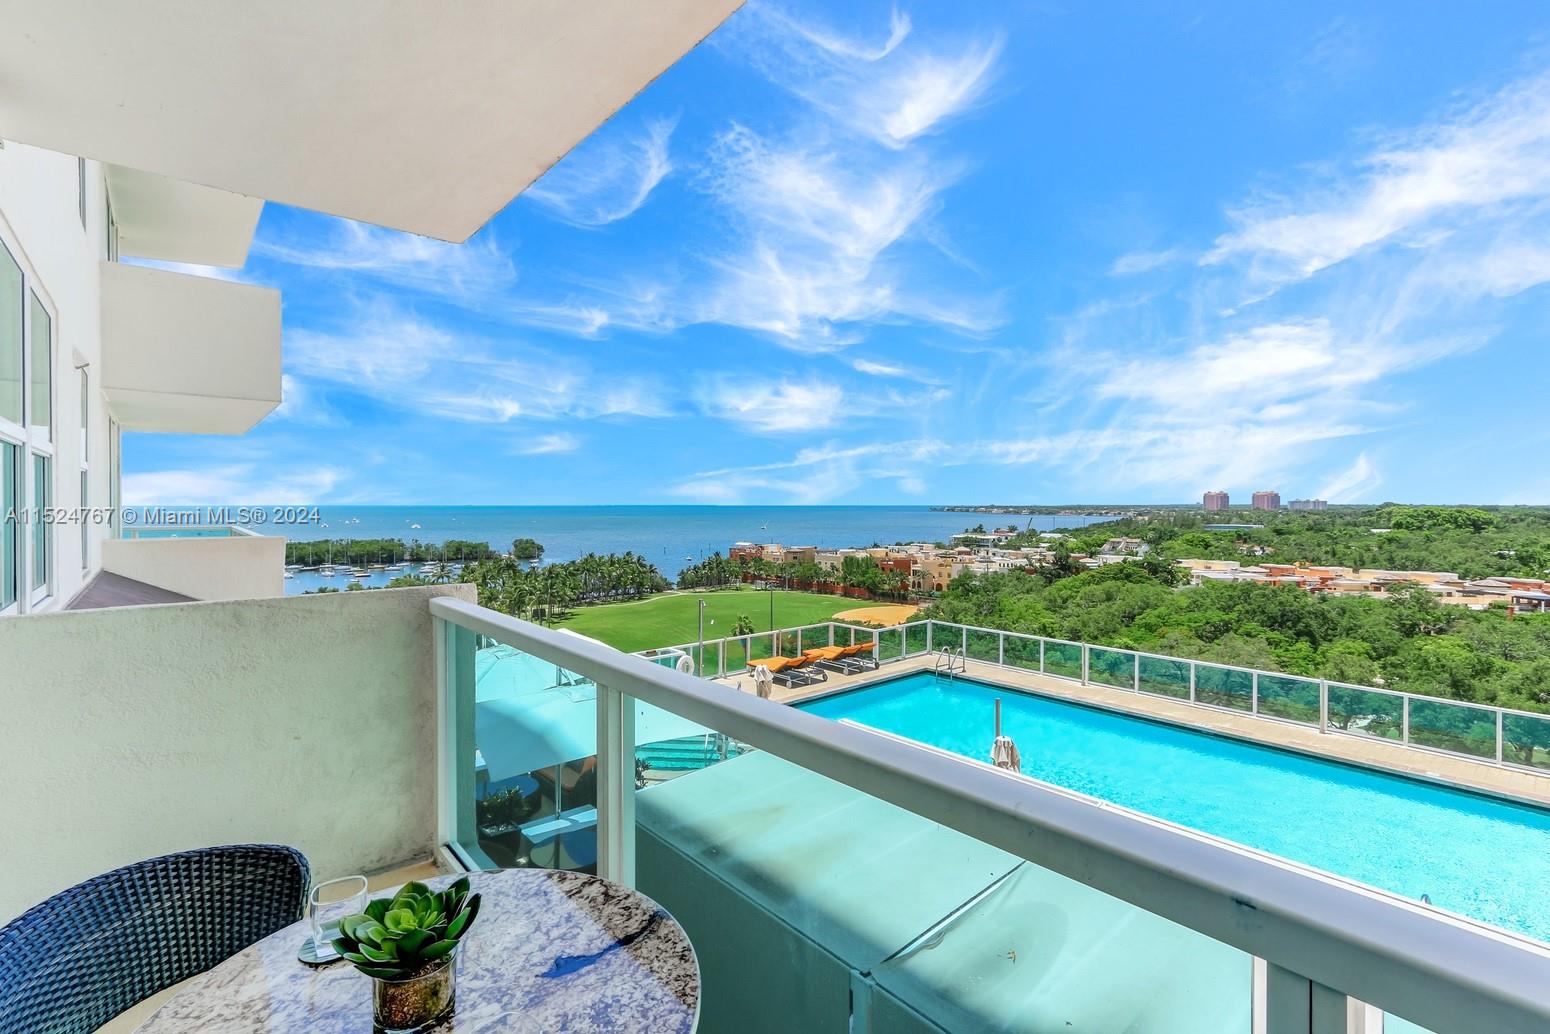 Stunning residence with bay, pool & city views in Arya, a full-service luxury condo/hotel in the heart of Coconut Grove’s historic village. Walk to trendy galleries, boutiques, cafes and bayfront parks & marinas. Updated, light-filled interior spaces & a split-floorplan layout w/option to rent as 2 separate 1BR/1BA units or as a 1BR/2BA+ kitchen & living area. No rental restrictions. Offered fully furnished w/chic designer pieces for the ultimate in turn-key living. Exceptional building amenities include heated pool & restaurant overlooking the bay, fitness center w/sauna, squash courts, business center & 24 hr. attended lobby w/concierge. Secure garage parking (1 assigned space) as well as valet & street parking for guests. Minutes to downtown, MIA, Brickell, Key Biscayne & the Beaches.